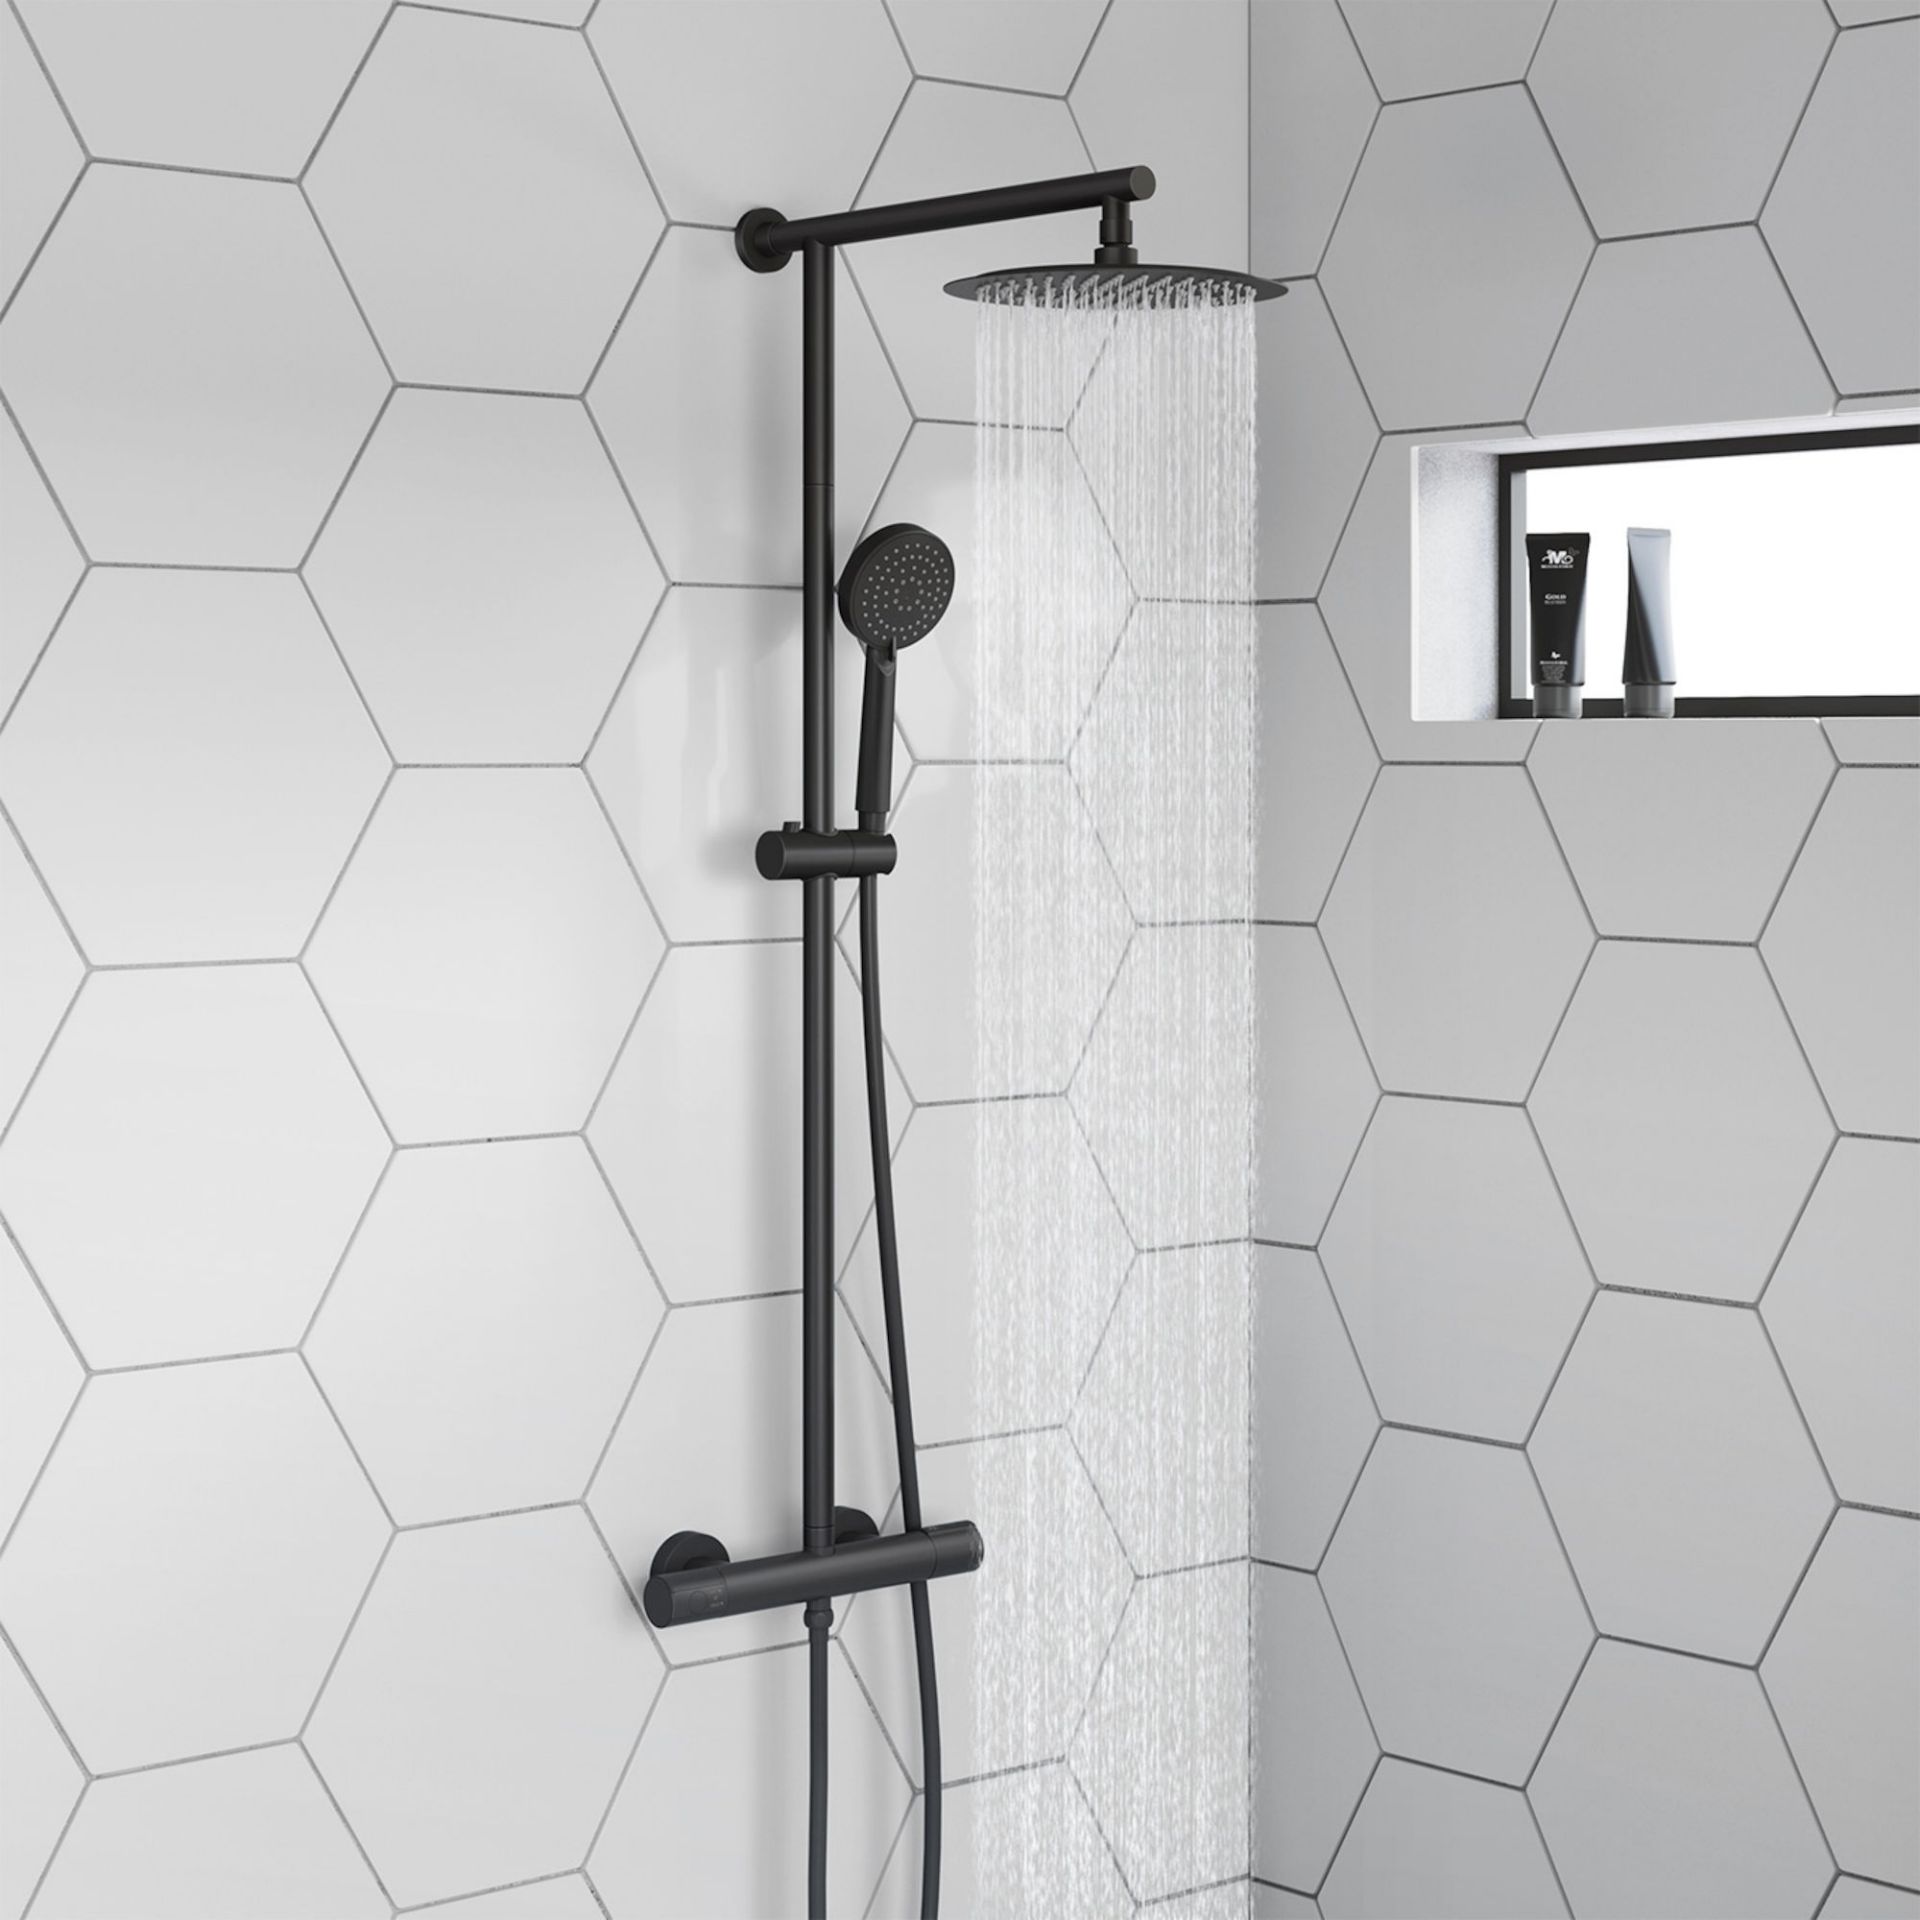 (OS31) Matte Black Round Exposed Thermostatic Shower Kit & Medium Head. RRP £419.99. Manufactured